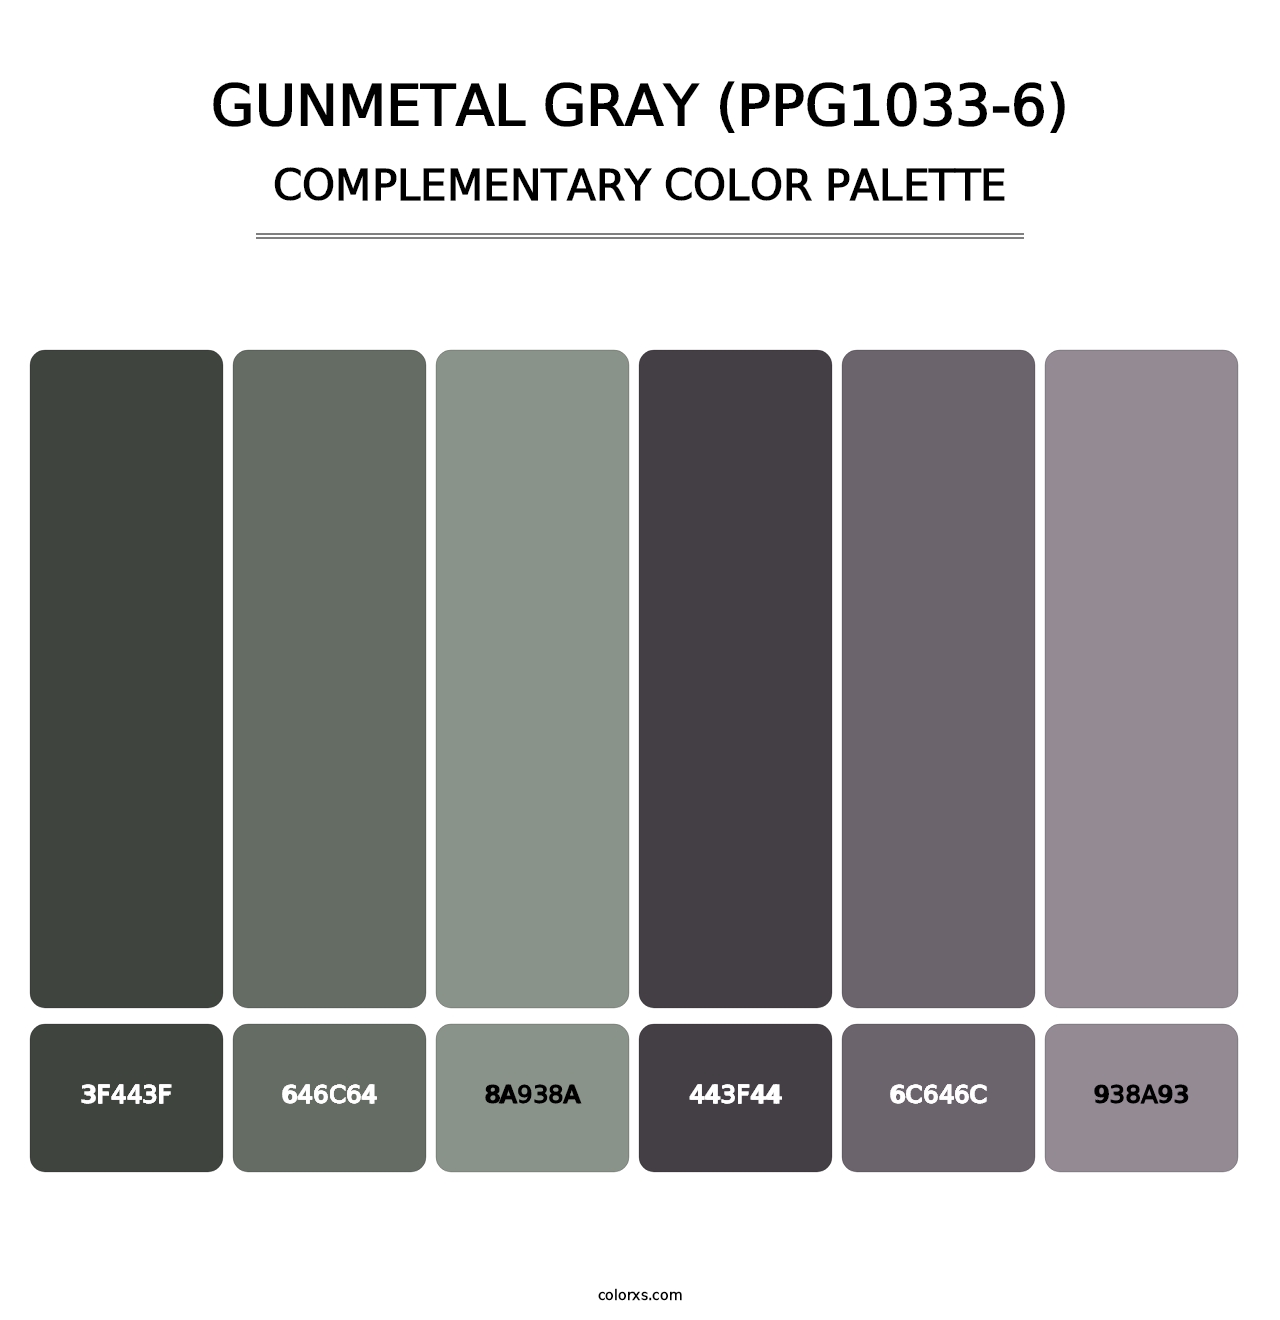 Gunmetal Gray (PPG1033-6) - Complementary Color Palette